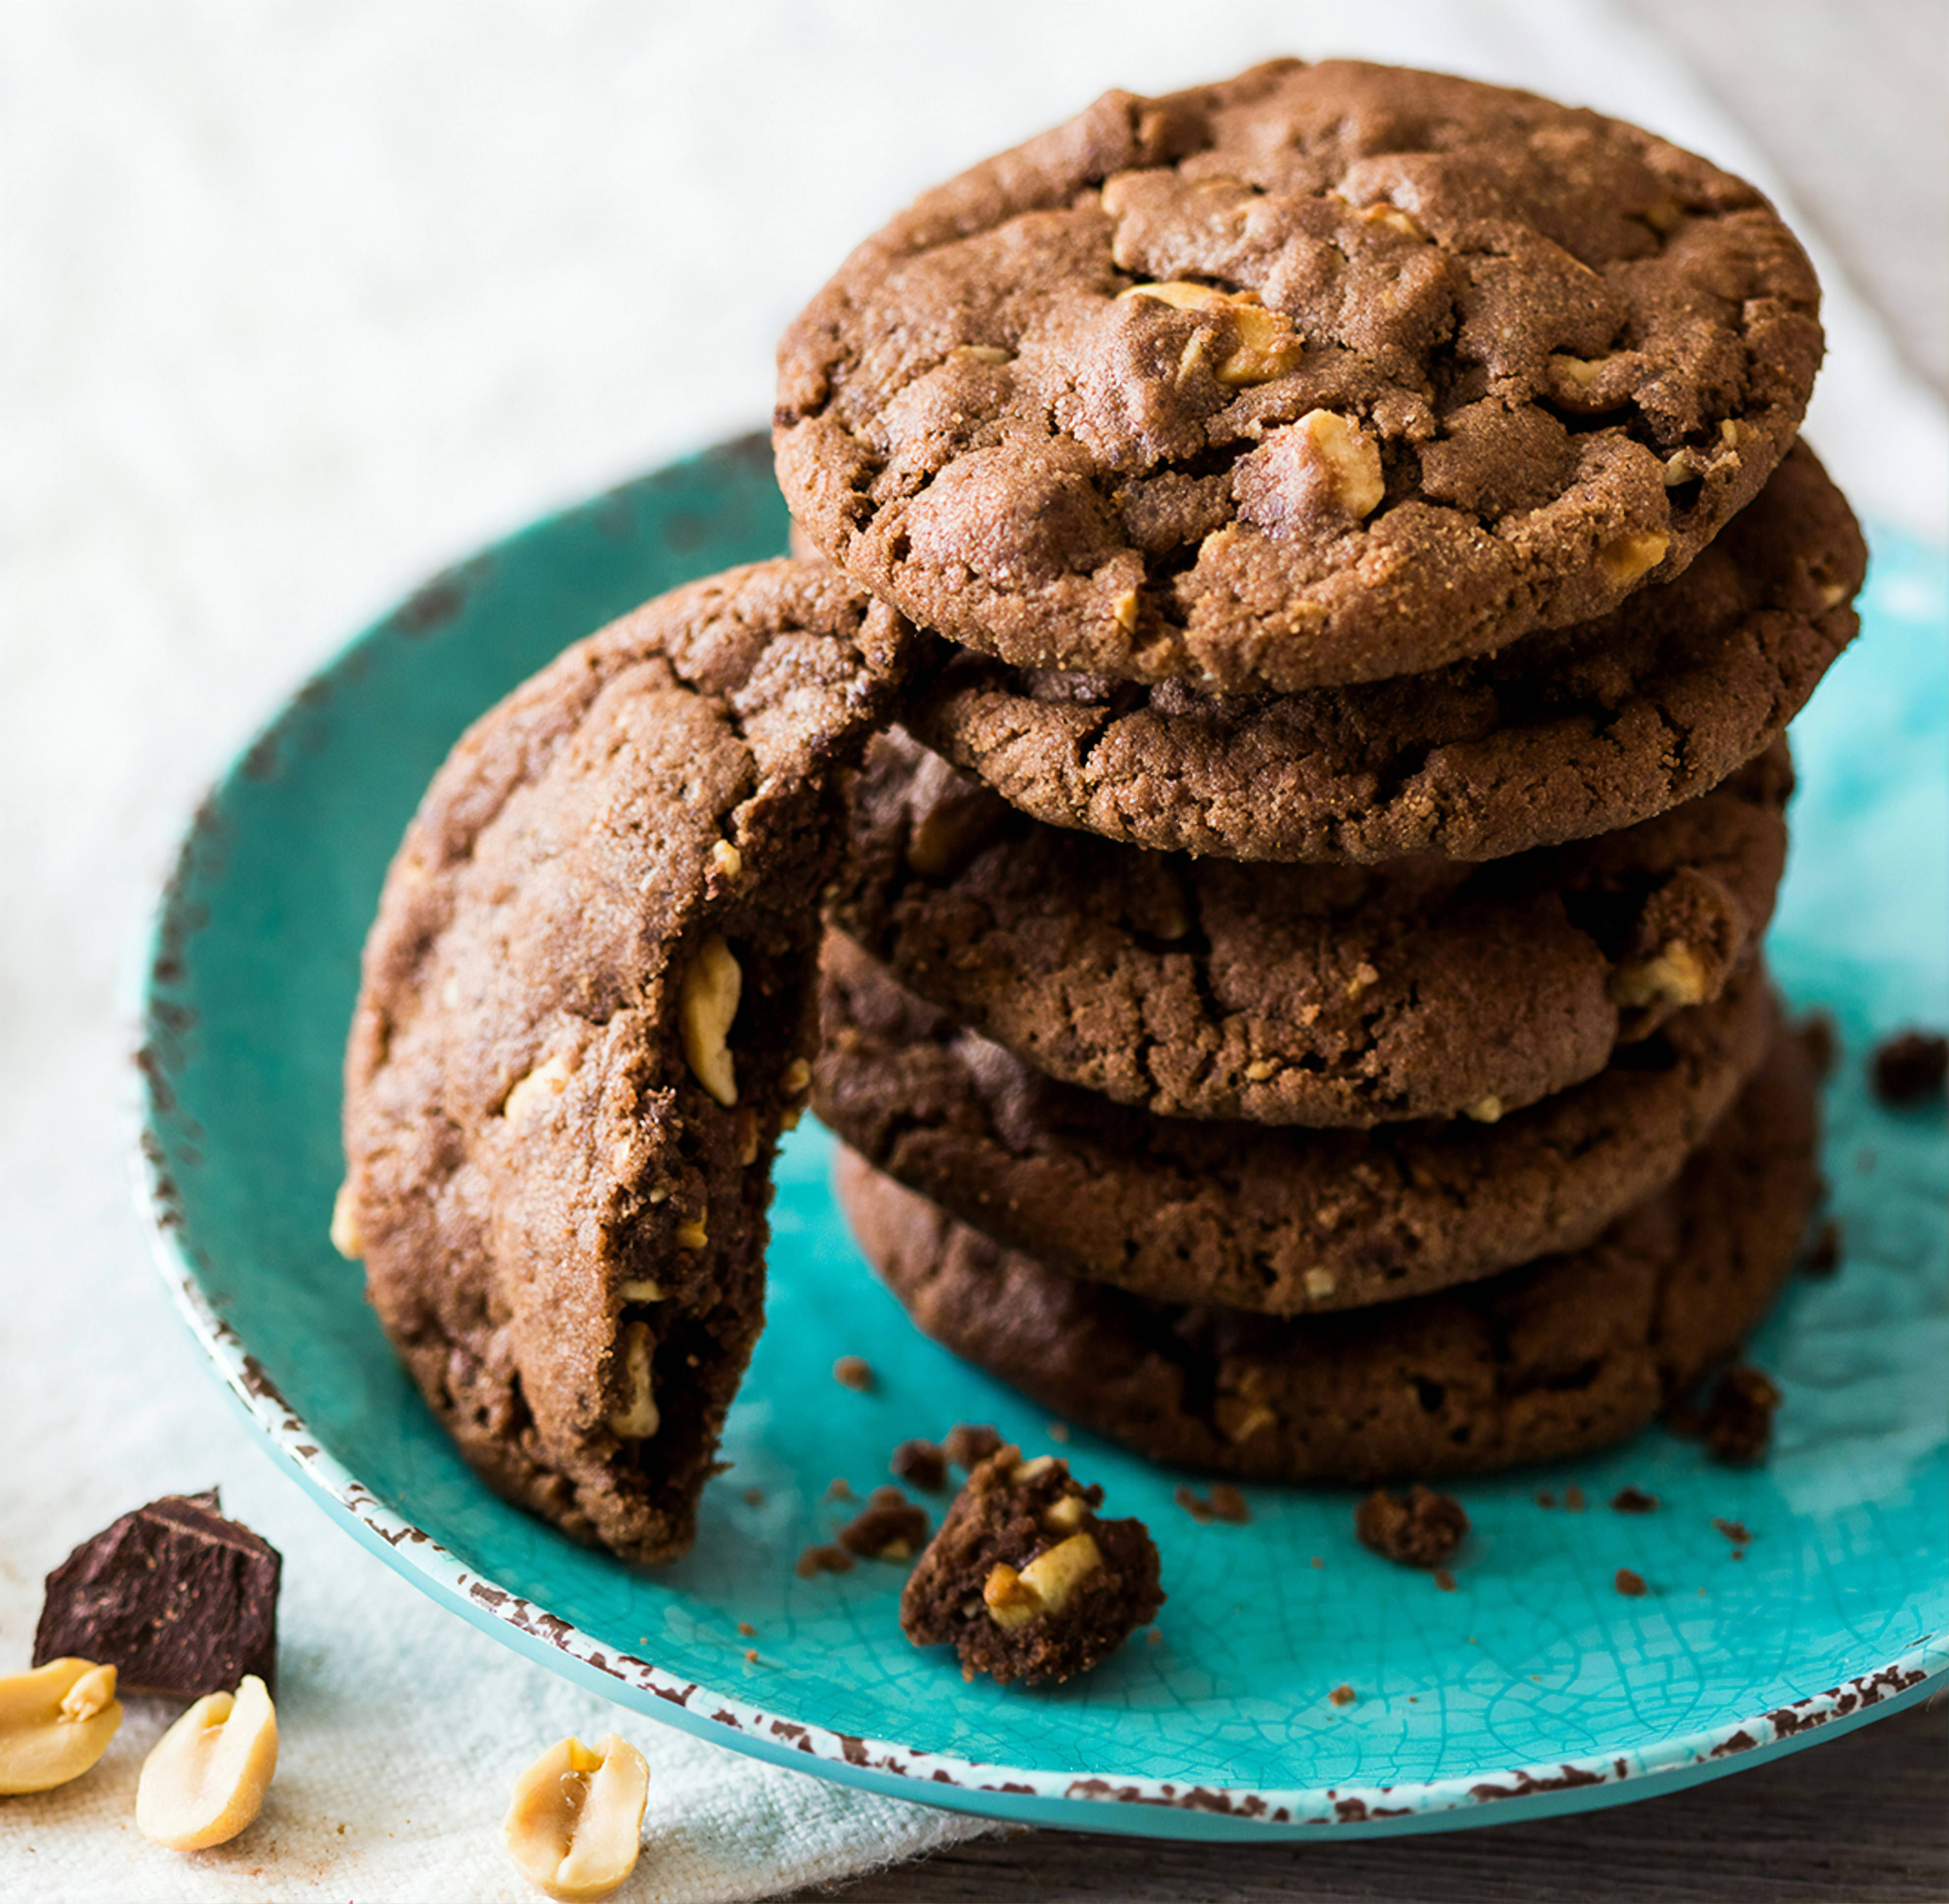 Popular Fusion of Chocolate and Peanut Butter Chip Cookies